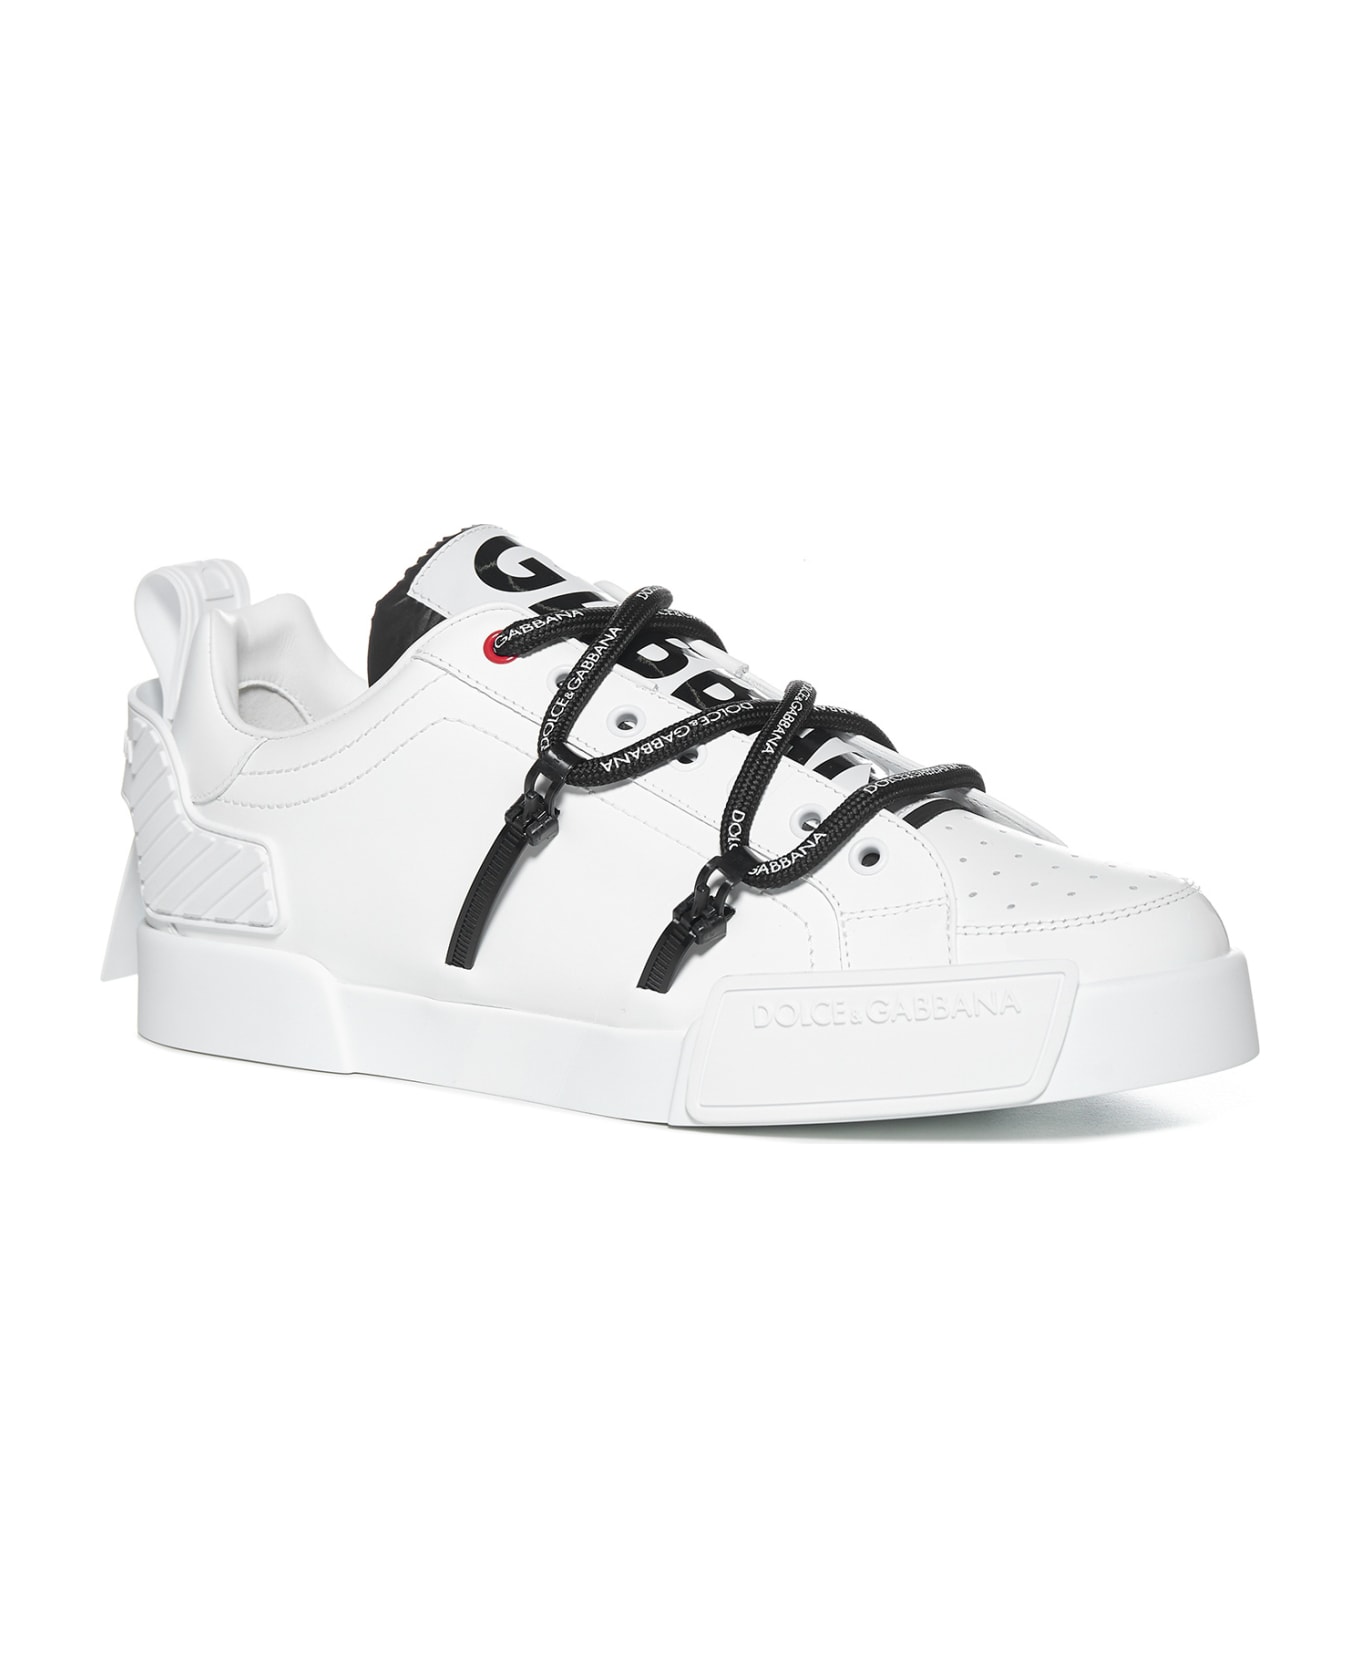 If you dont have the heart to beat your sneaker heat Portofino Sneaker In Calfskin And Patent Leather - White